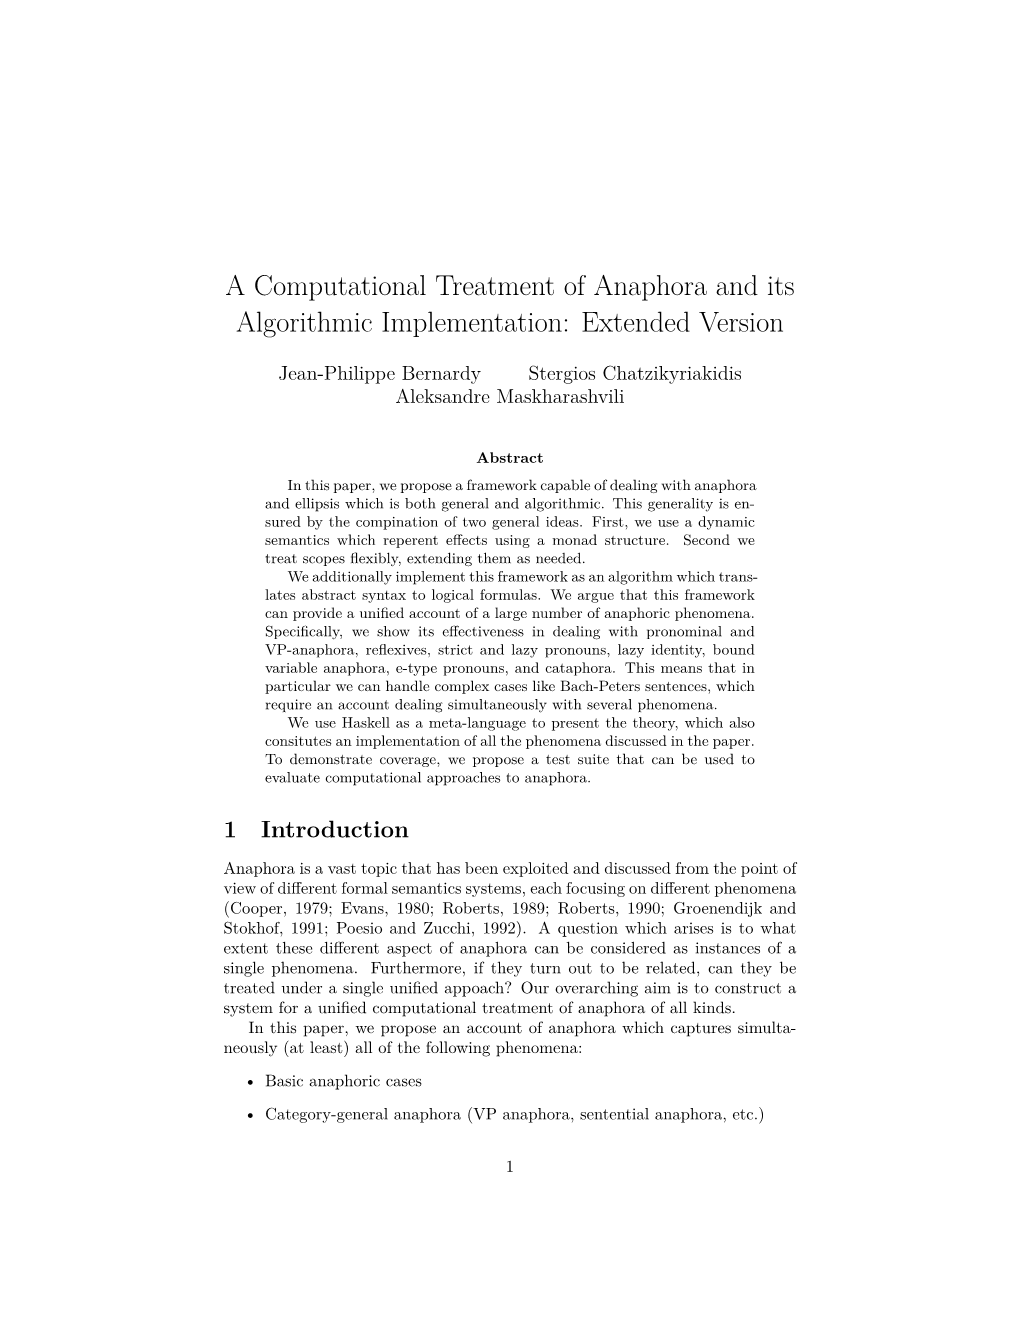 A Computational Treatment of Anaphora and Its Algorithmic Implementation: Extended Version